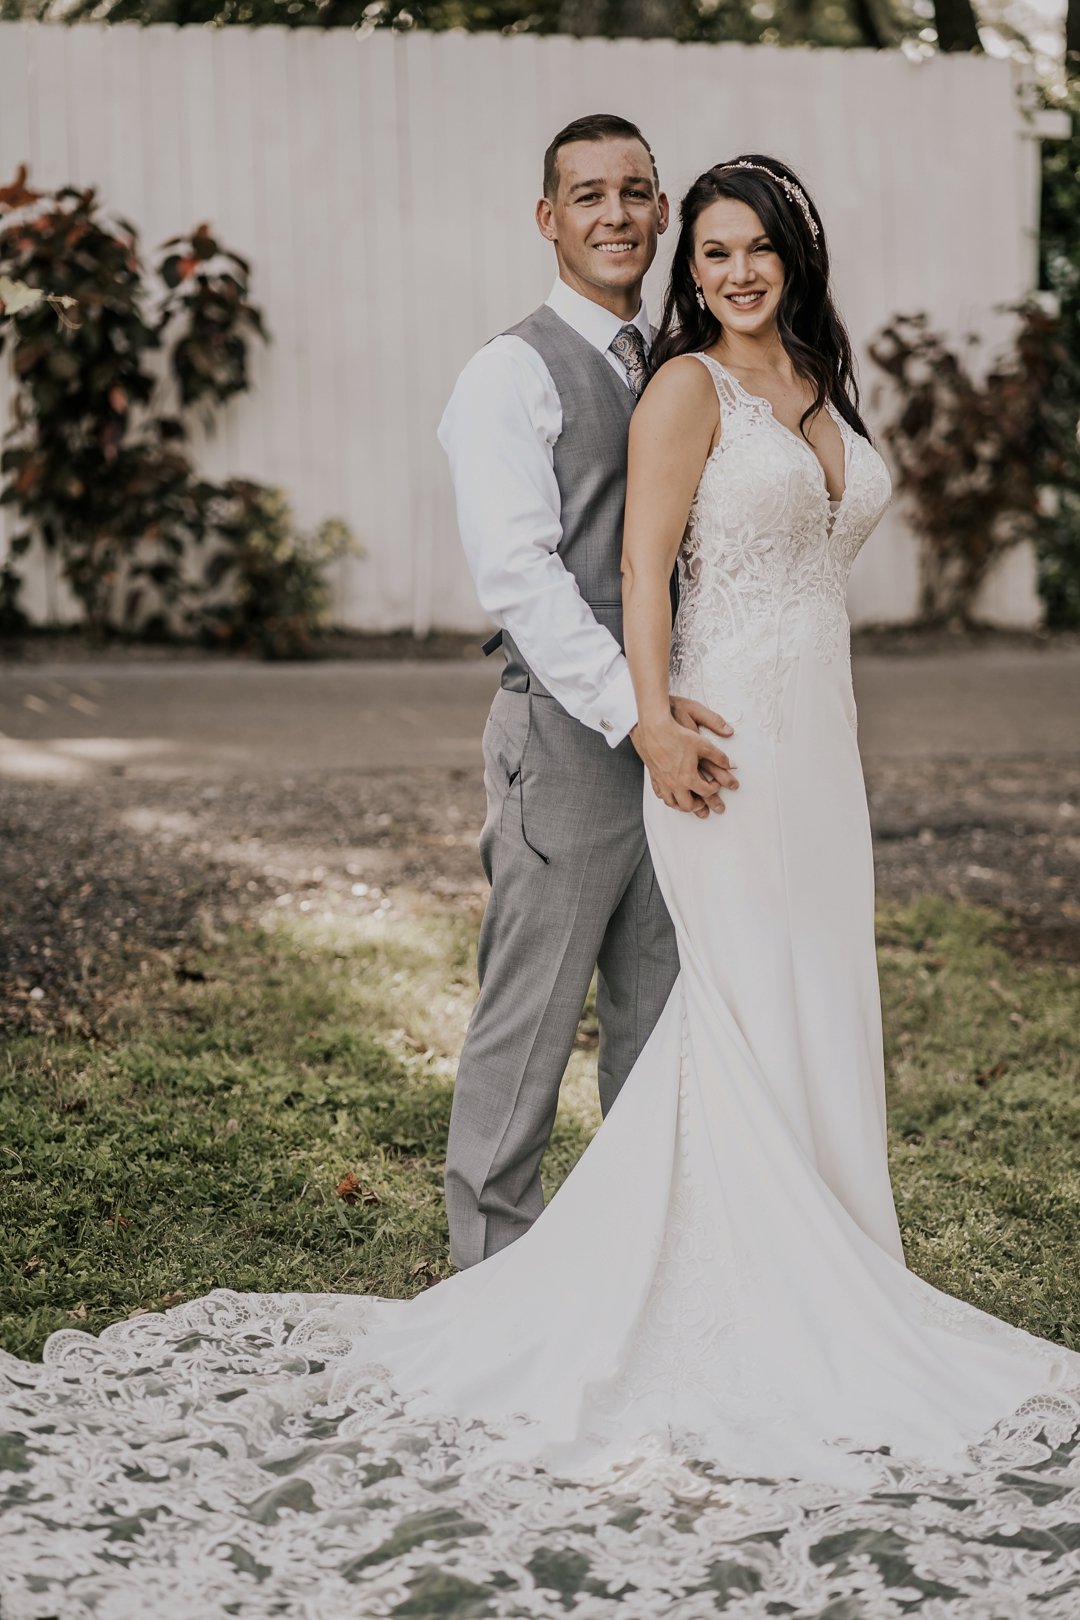 A vintage elegant elopement at Keel and Curly Winery in Plant City by Tampa wedding photographer Tami Keehn.